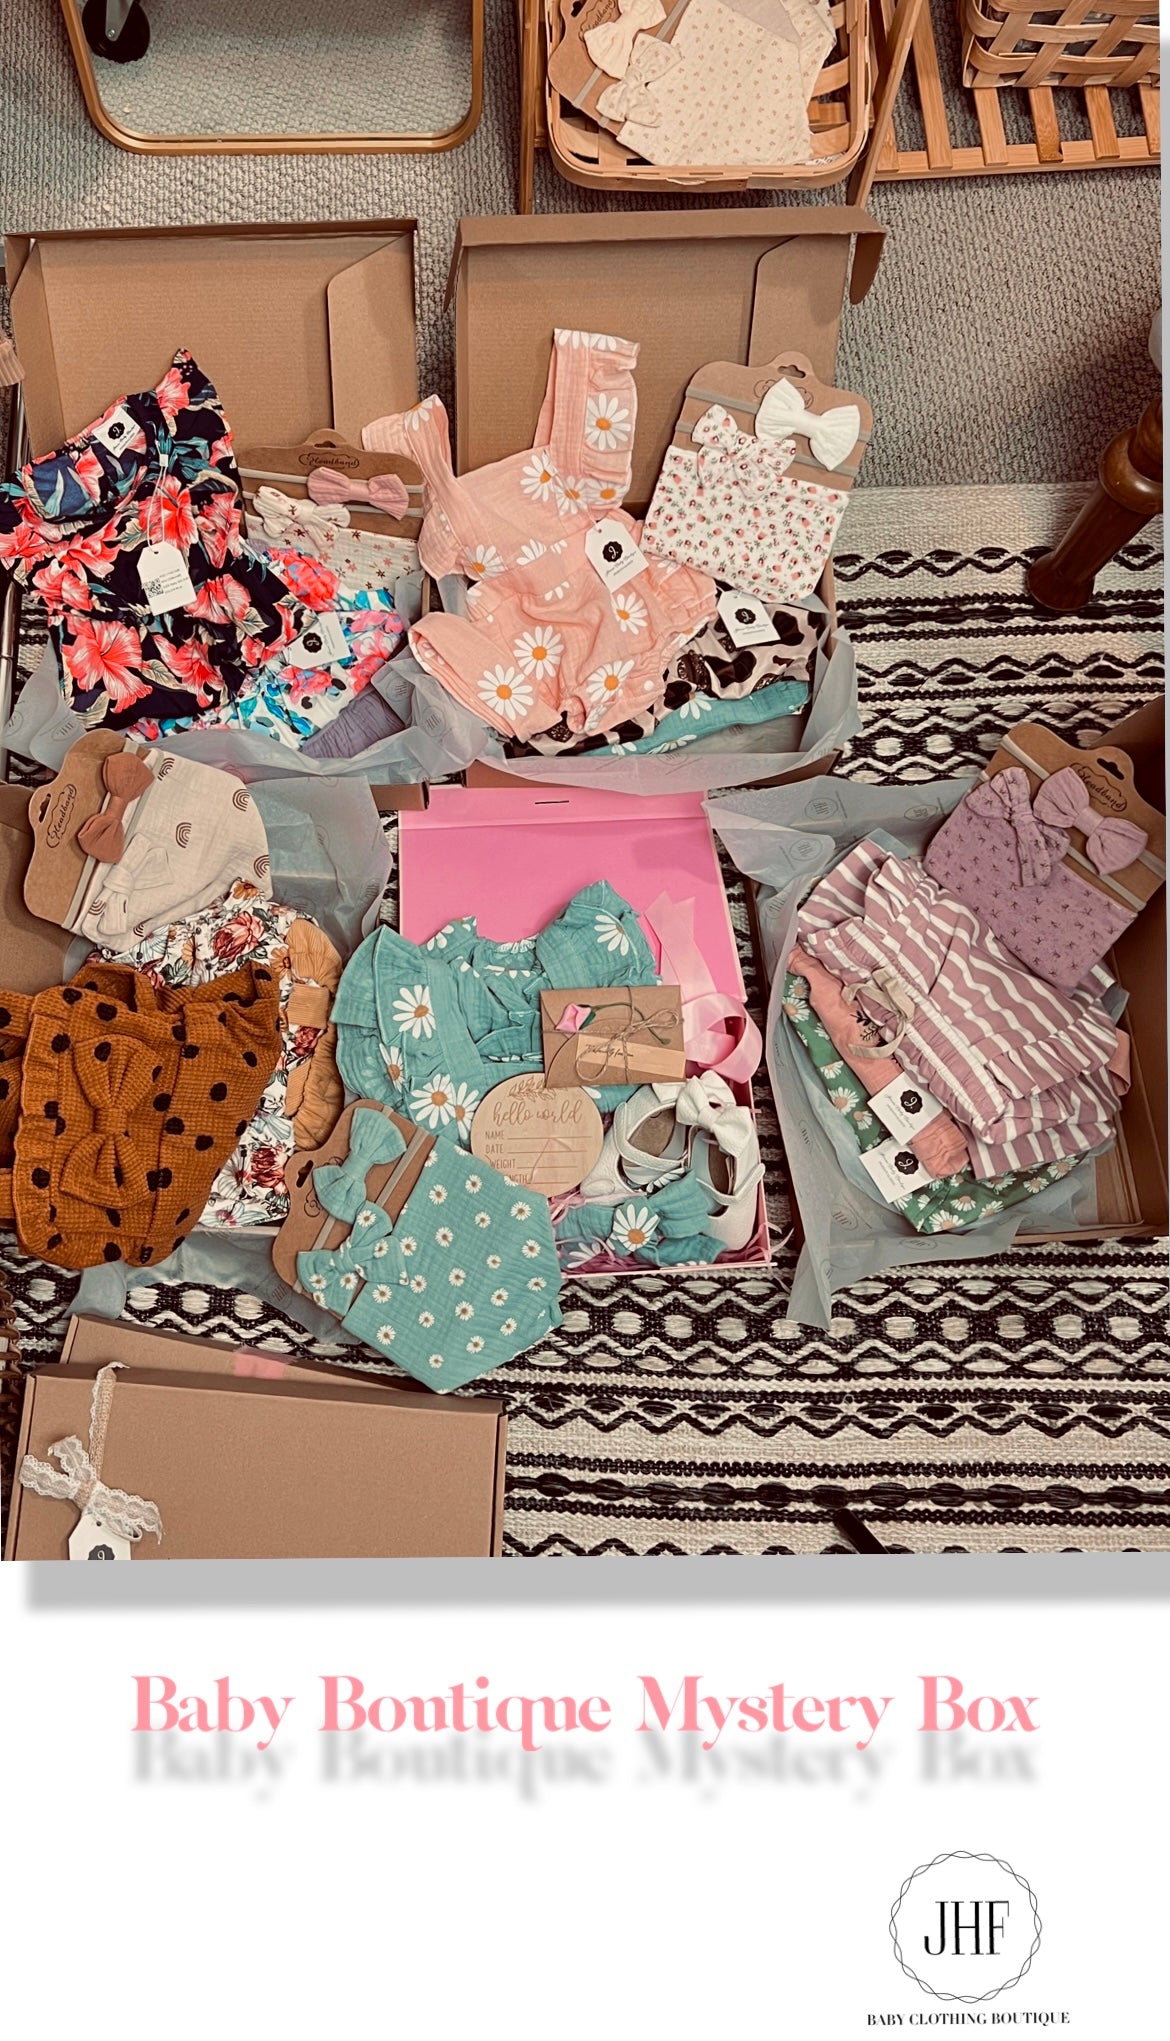 BABY BOUTIQUE MYSTERY BOX